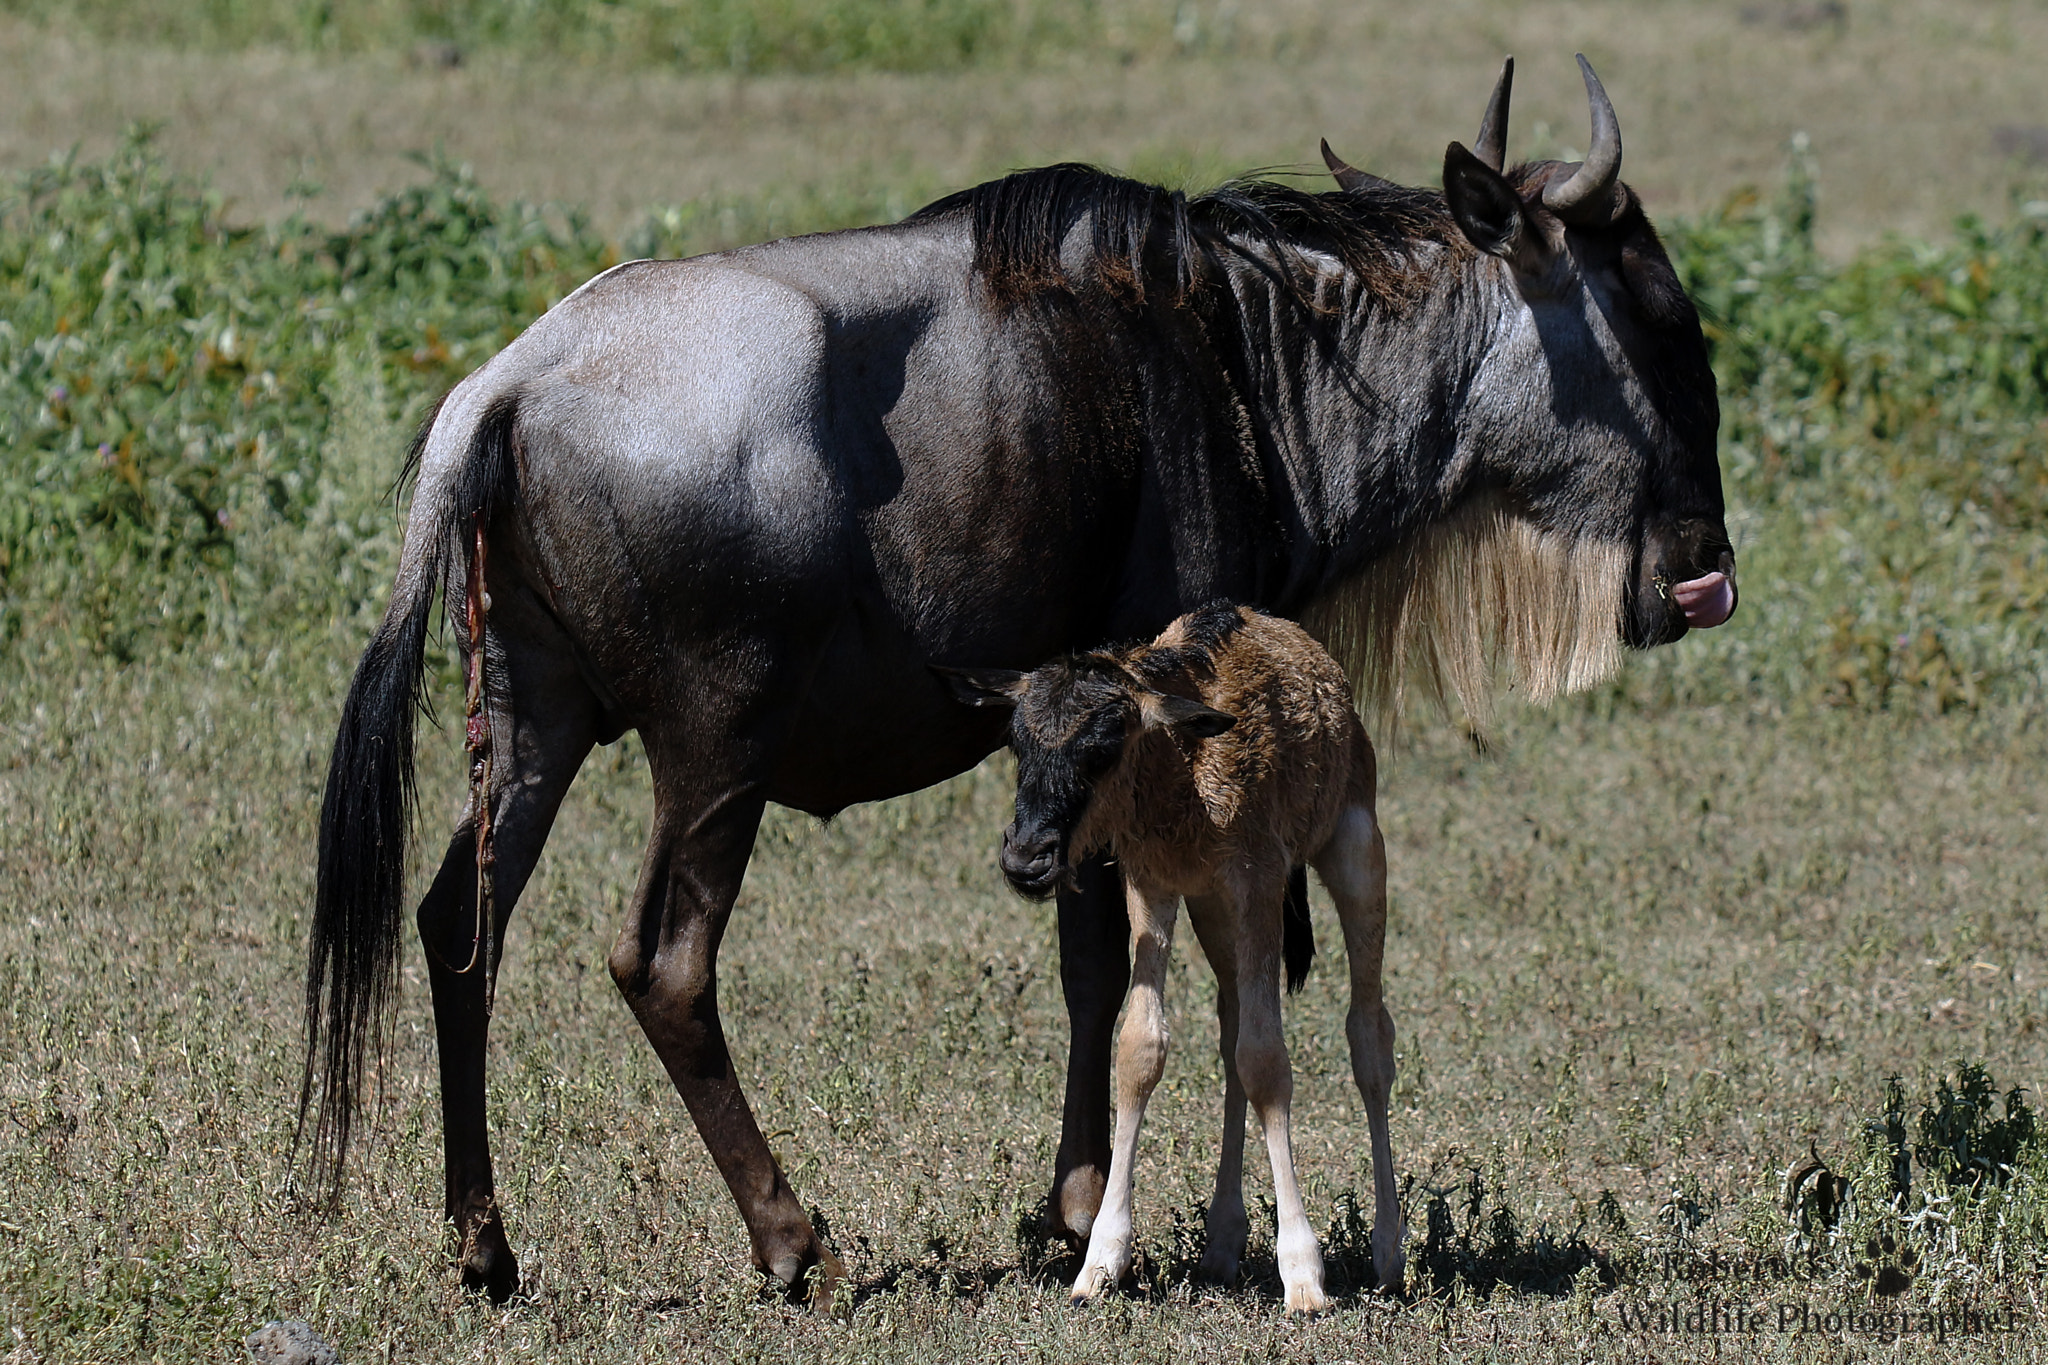 Sony SLT-A77 sample photo. Wildebeest are born photography